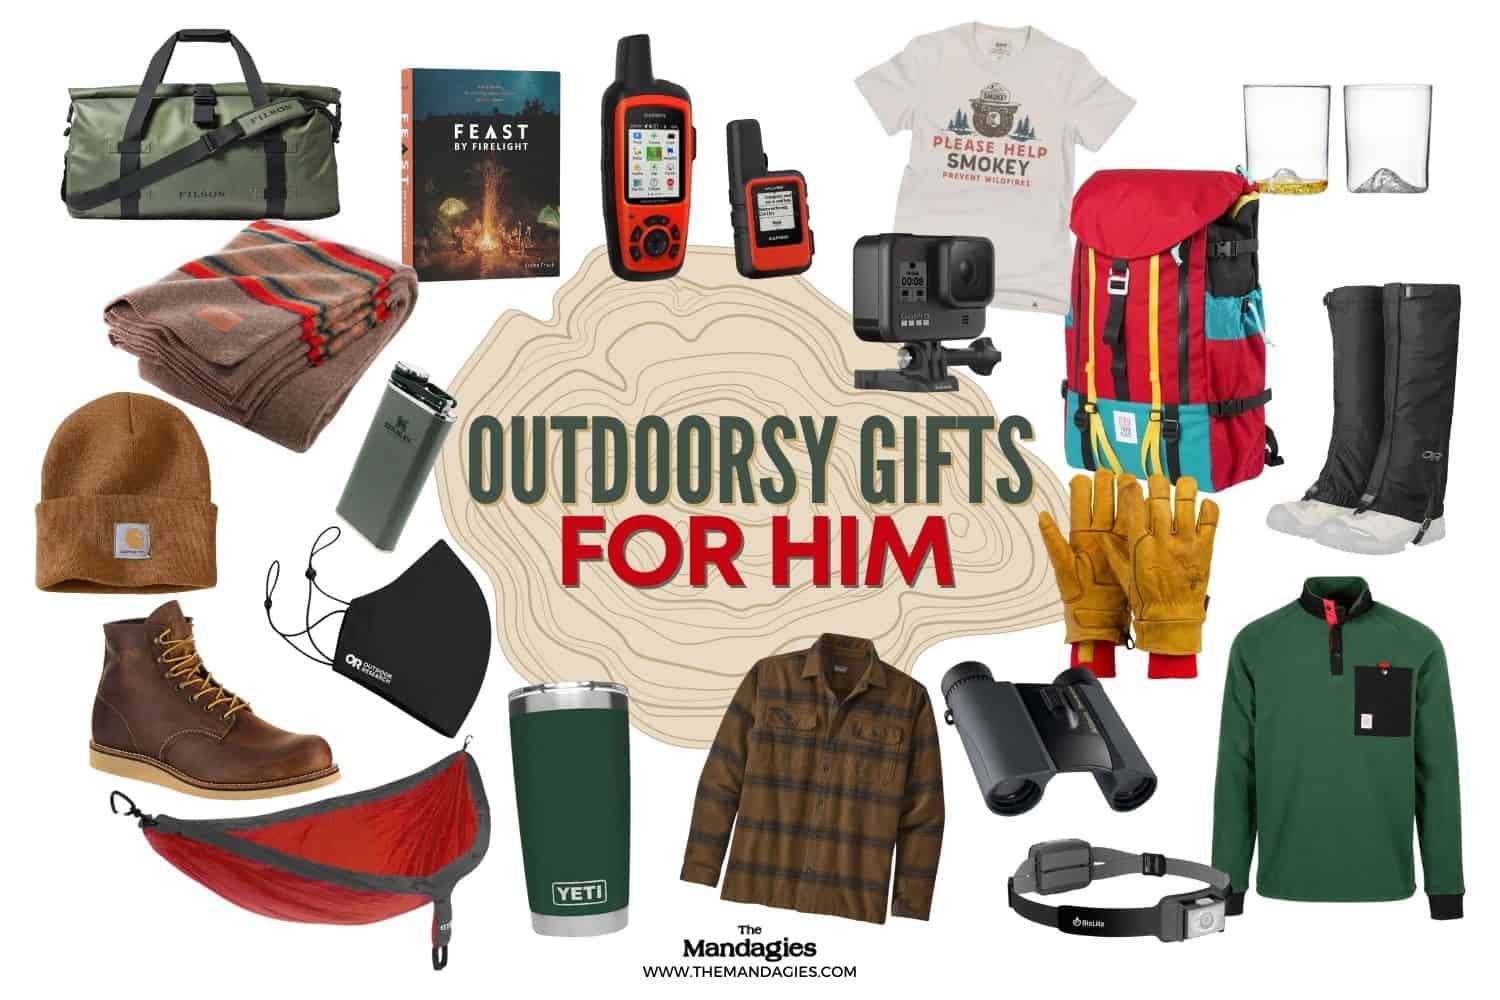 21 Rugged Gifts For Outdoorsy Men That They Will Instantly Be Taking On The Next Adventure